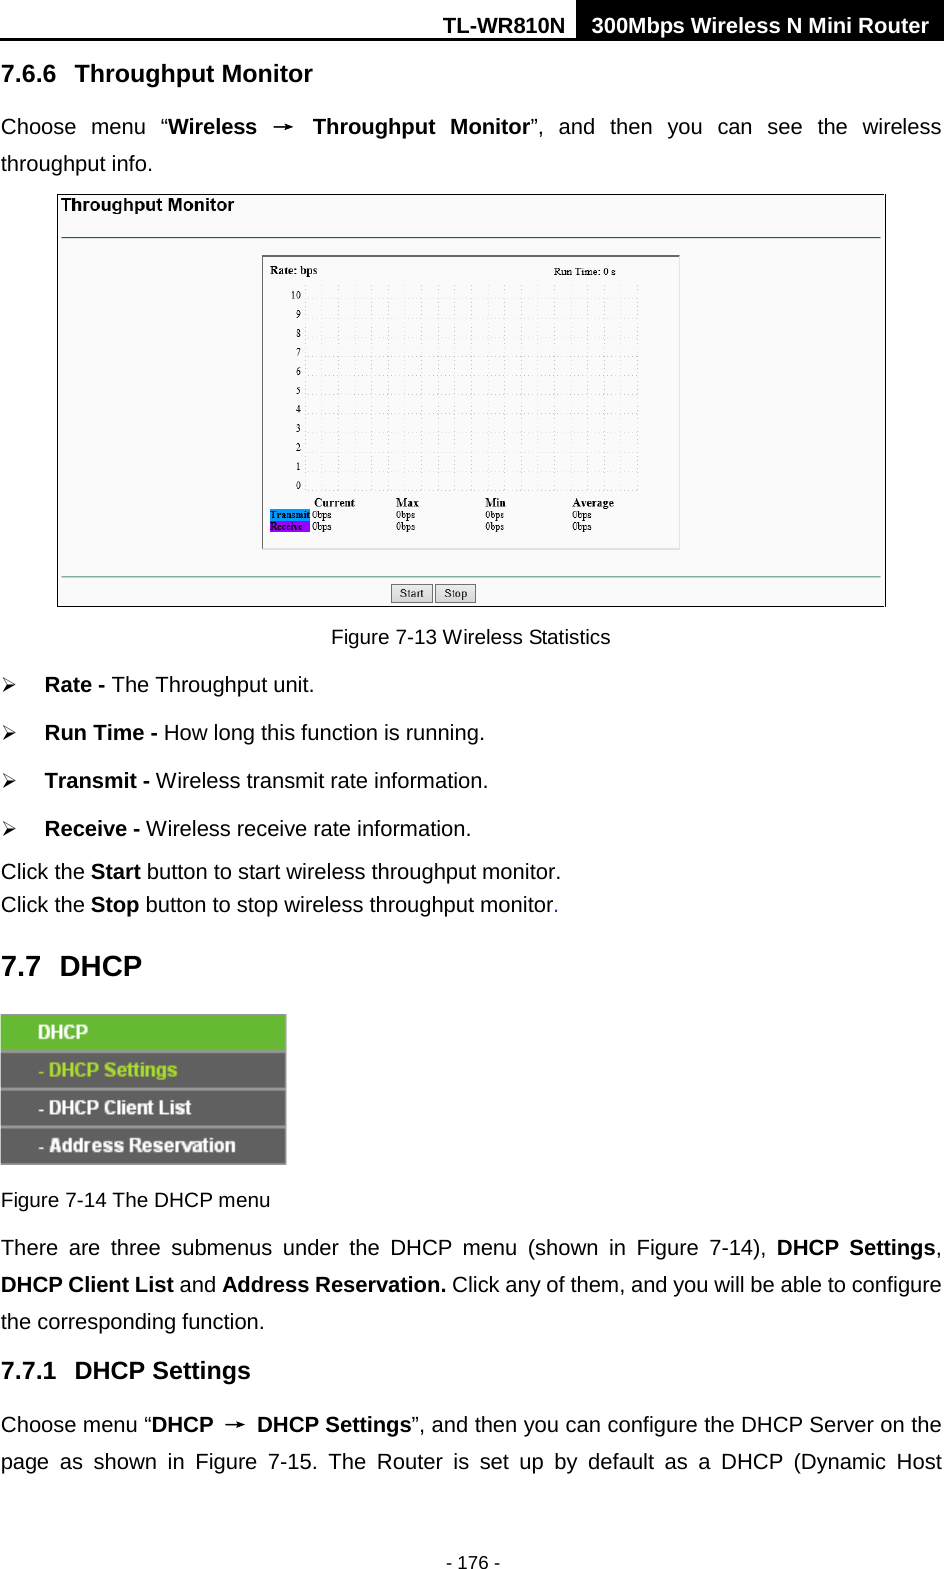 TL-WR810N 300Mbps Wireless N Mini Router  - 176 - 7.6.6 Throughput Monitor Choose menu “Wireless → Throughput Monitor”,  and then you can see the wireless throughput info.  Figure 7-13 Wireless Statistics  Rate - The Throughput unit.  Run Time - How long this function is running.  Transmit - Wireless transmit rate information.  Receive - Wireless receive rate information. Click the Start button to start wireless throughput monitor. Click the Stop button to stop wireless throughput monitor. 7.7 DHCP  Figure 7-14 The DHCP menu There are three submenus under the DHCP menu (shown in Figure  7-14),  DHCP Settings, DHCP Client List and Address Reservation. Click any of them, and you will be able to configure the corresponding function. 7.7.1 DHCP Settings Choose menu “DHCP → DHCP Settings”, and then you can configure the DHCP Server on the page  as  shown in Figure  7-15.  The  Router is set up by default as a DHCP (Dynamic Host 